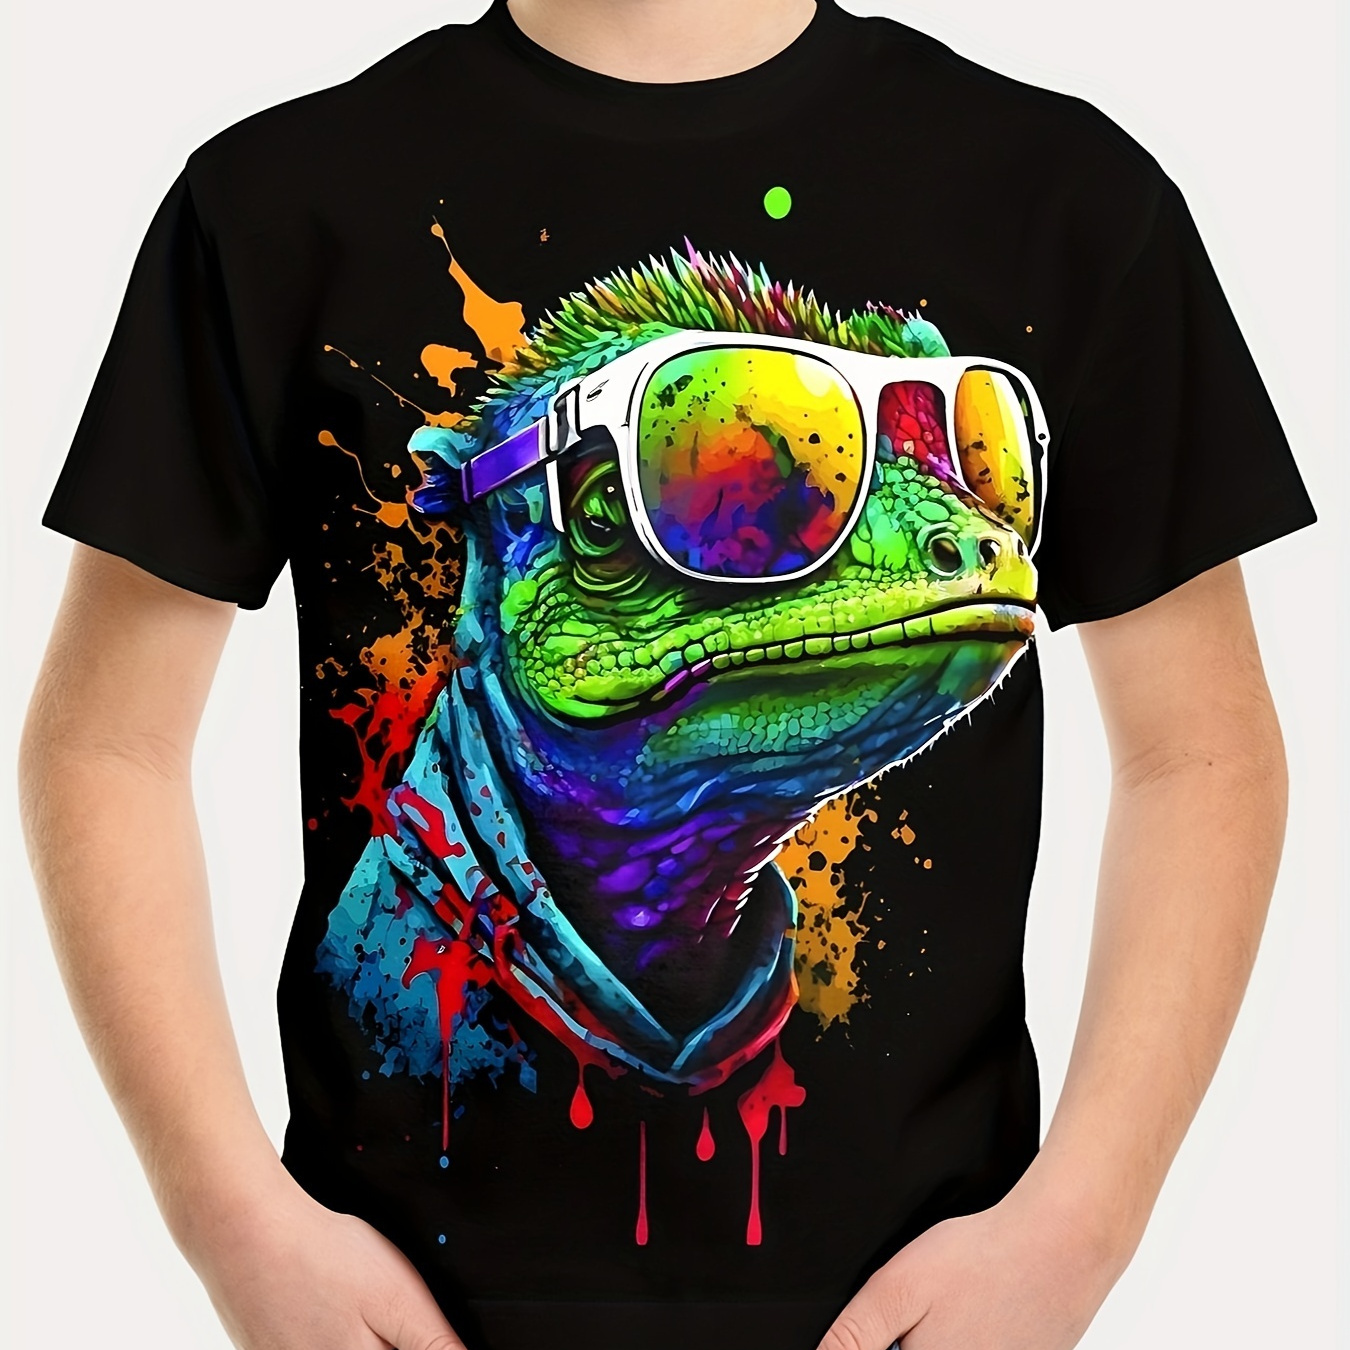 

Chameleon With Sunglasses 3d Print Boy's Casual T-shirt, Short Sleeve Comfy Tee Tops, Summer Outdoor Sports Clothing